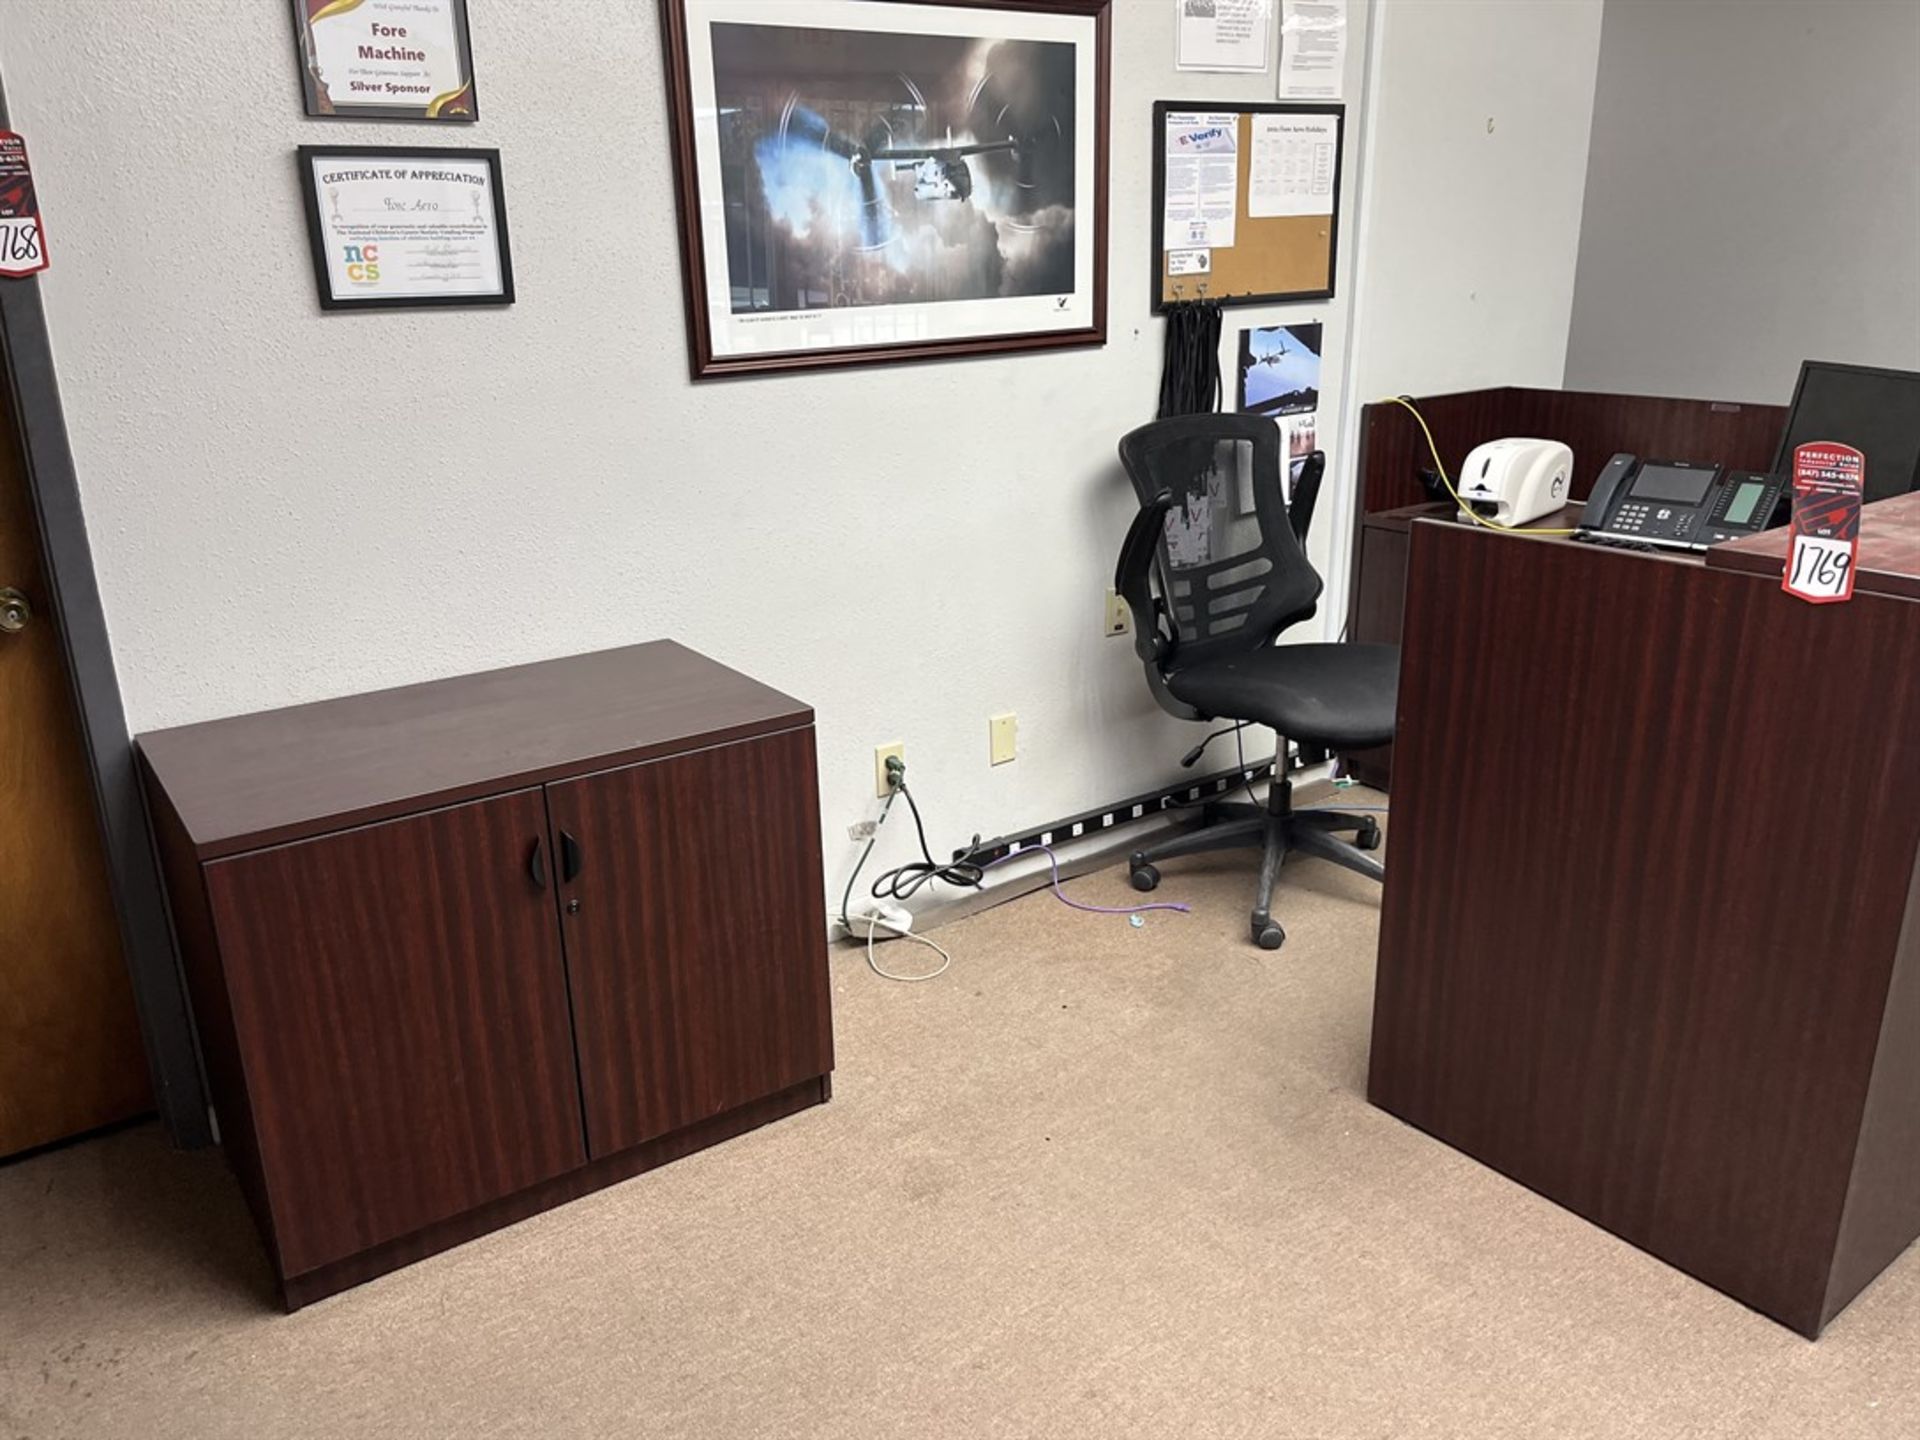 Lot consisting of Reception Desk, Monitors, File Cabinets, and Chair, (PC NOT INCLUDED) - Image 3 of 5